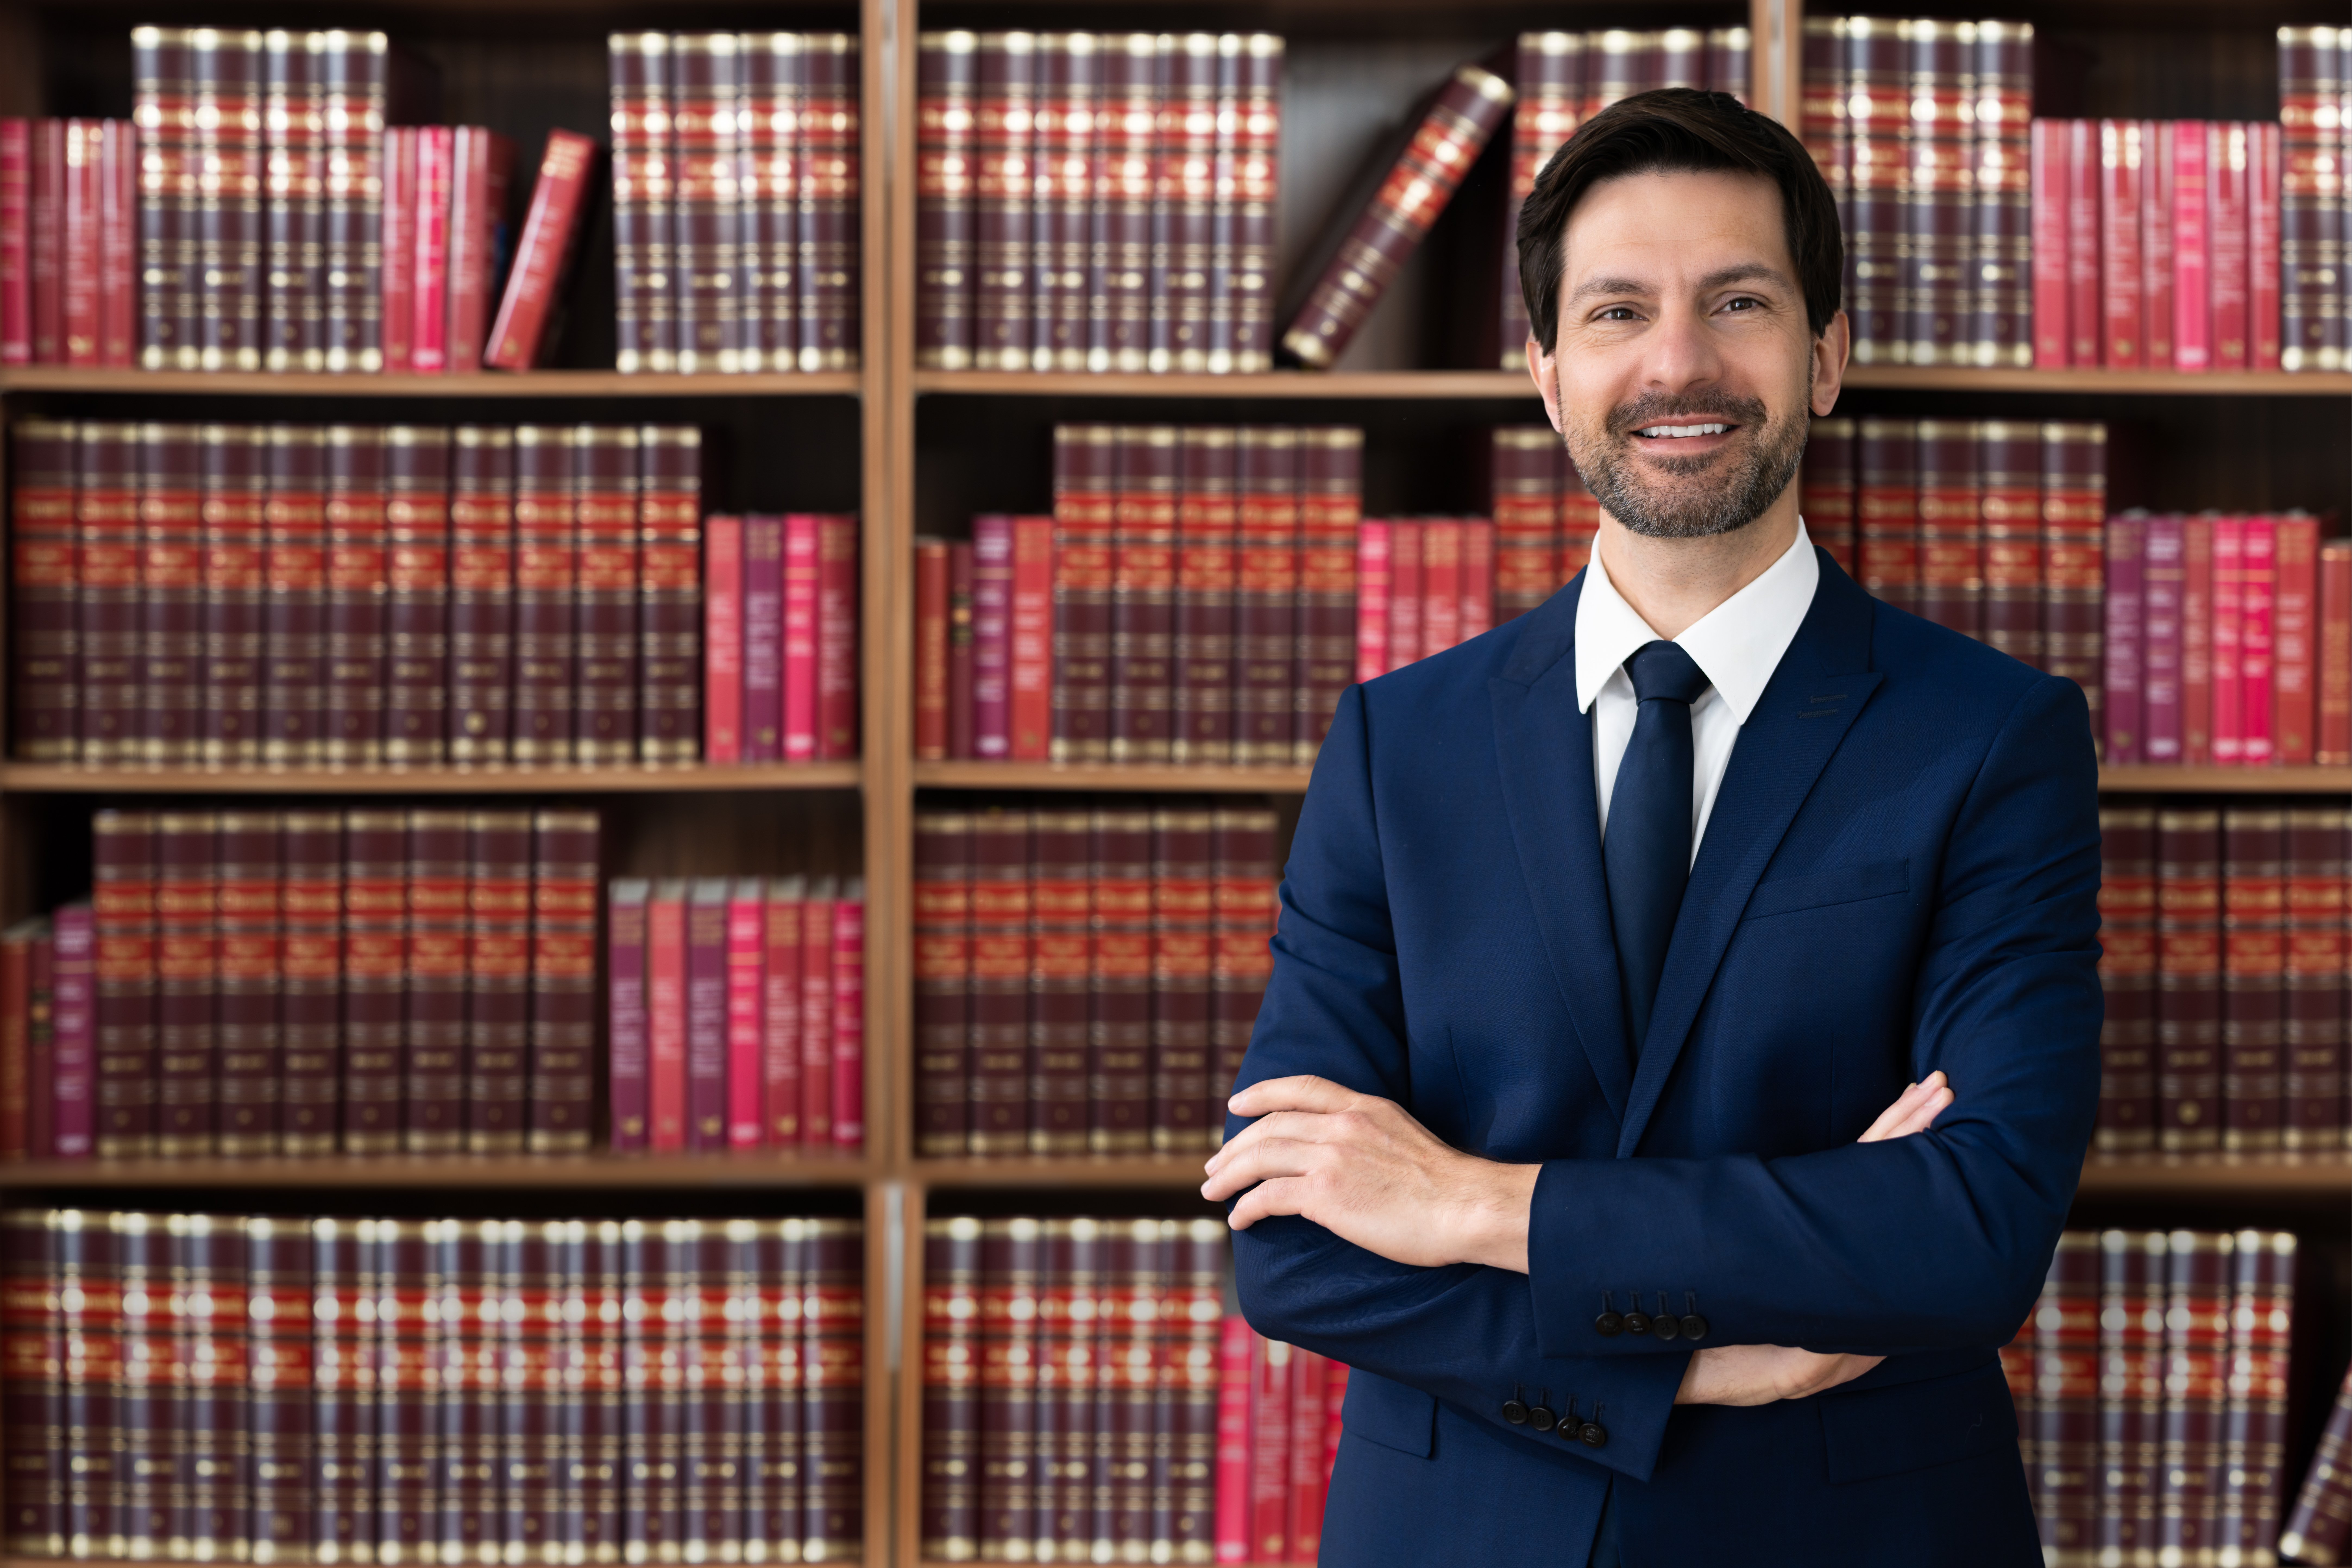 Law clerk standing with arms crossed in front of bookcases